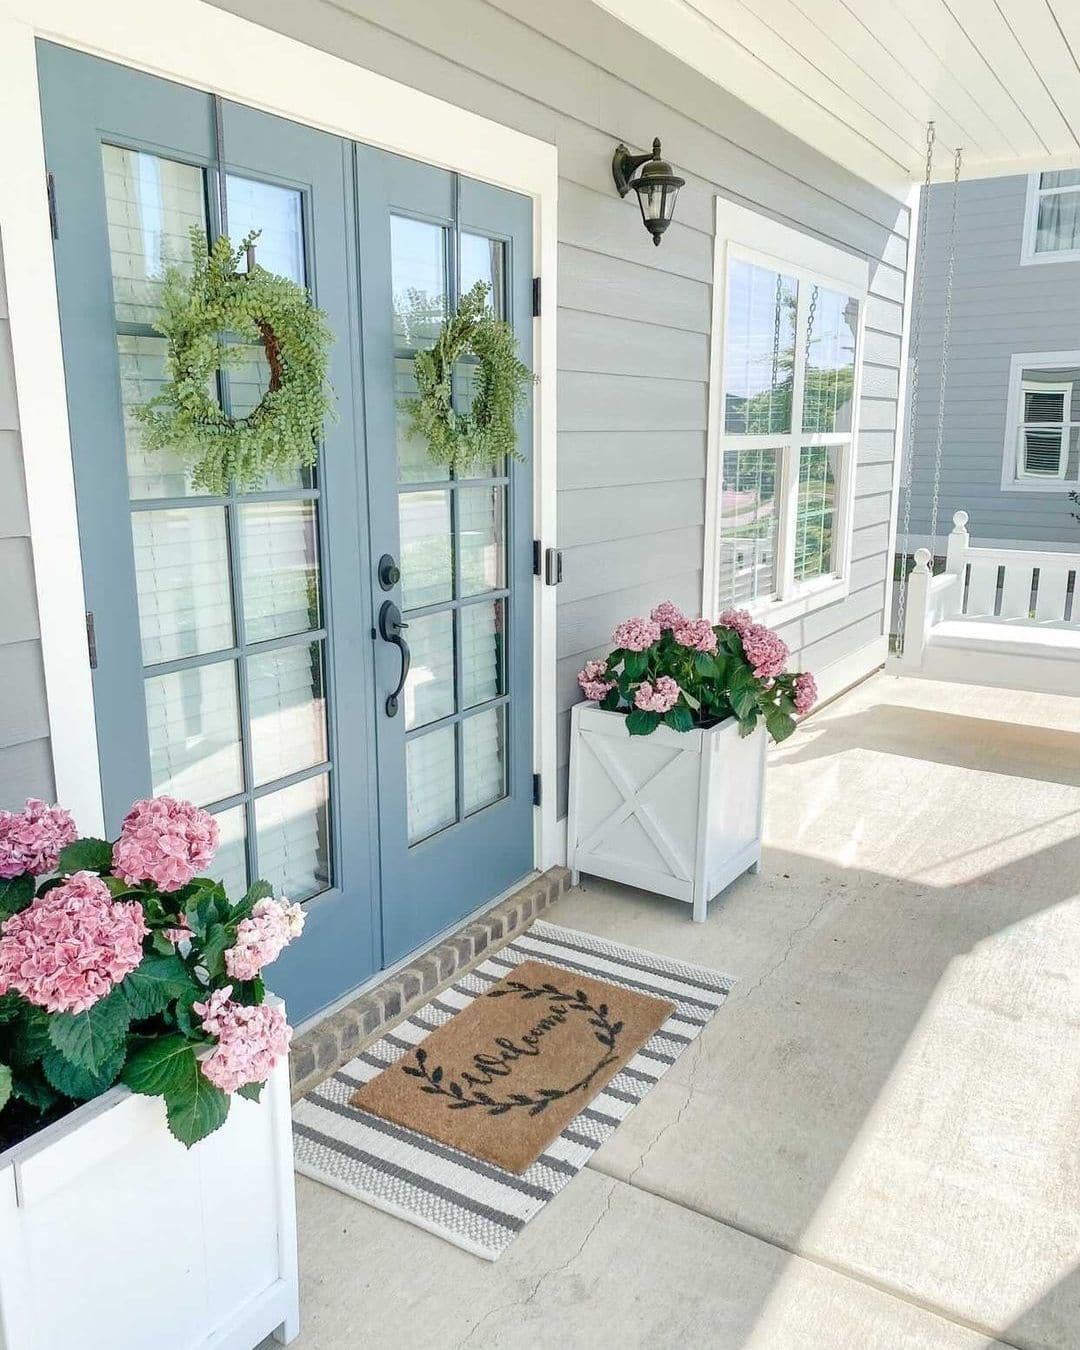 SPRING FRONT PORCH DECORATING IDEAS